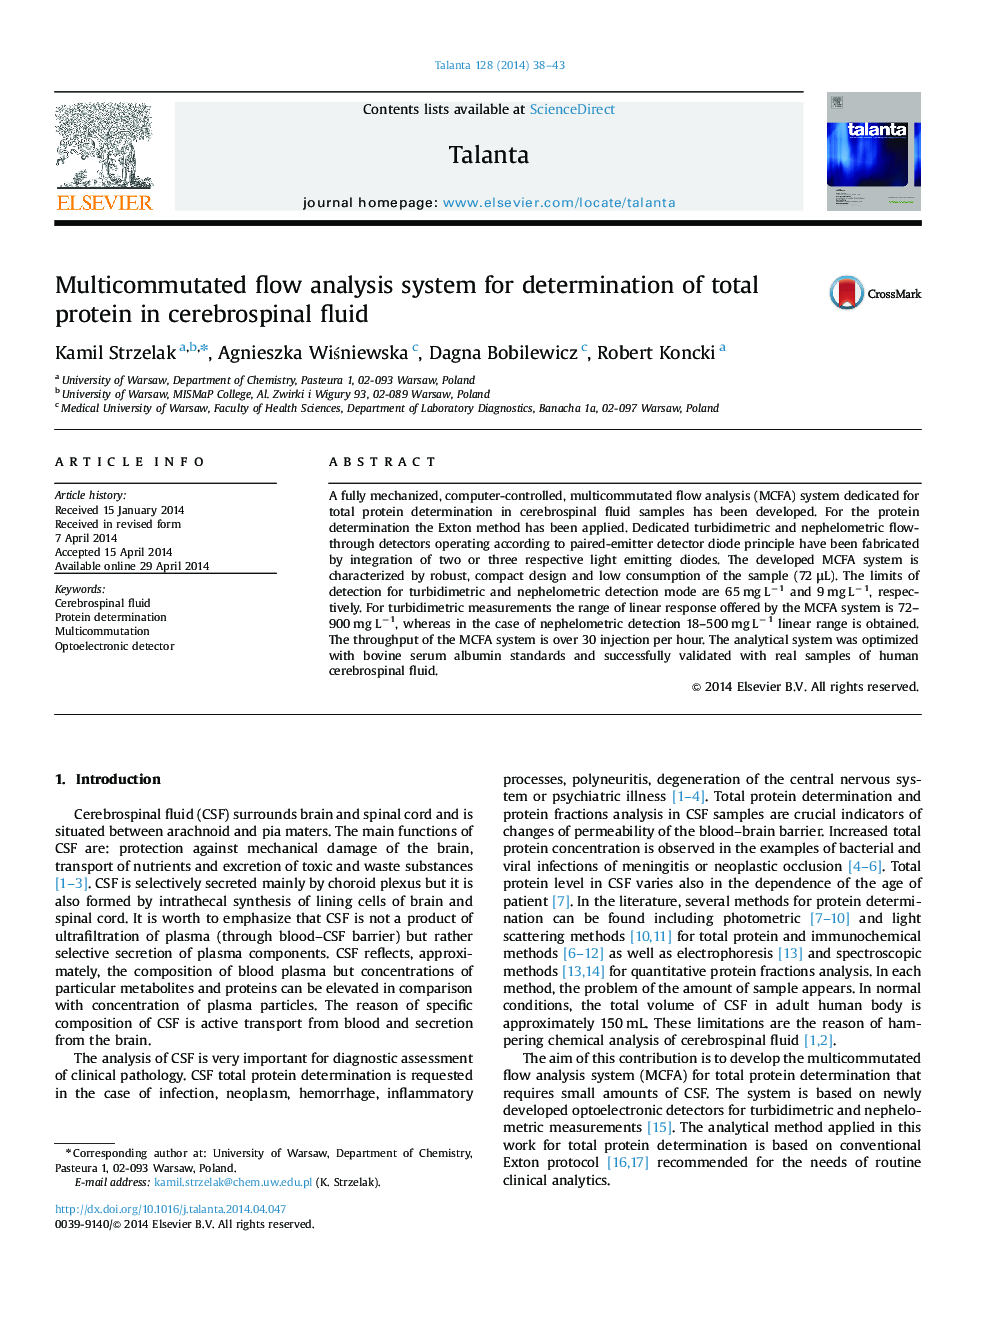 Multicommutated flow analysis system for determination of total protein in cerebrospinal fluid